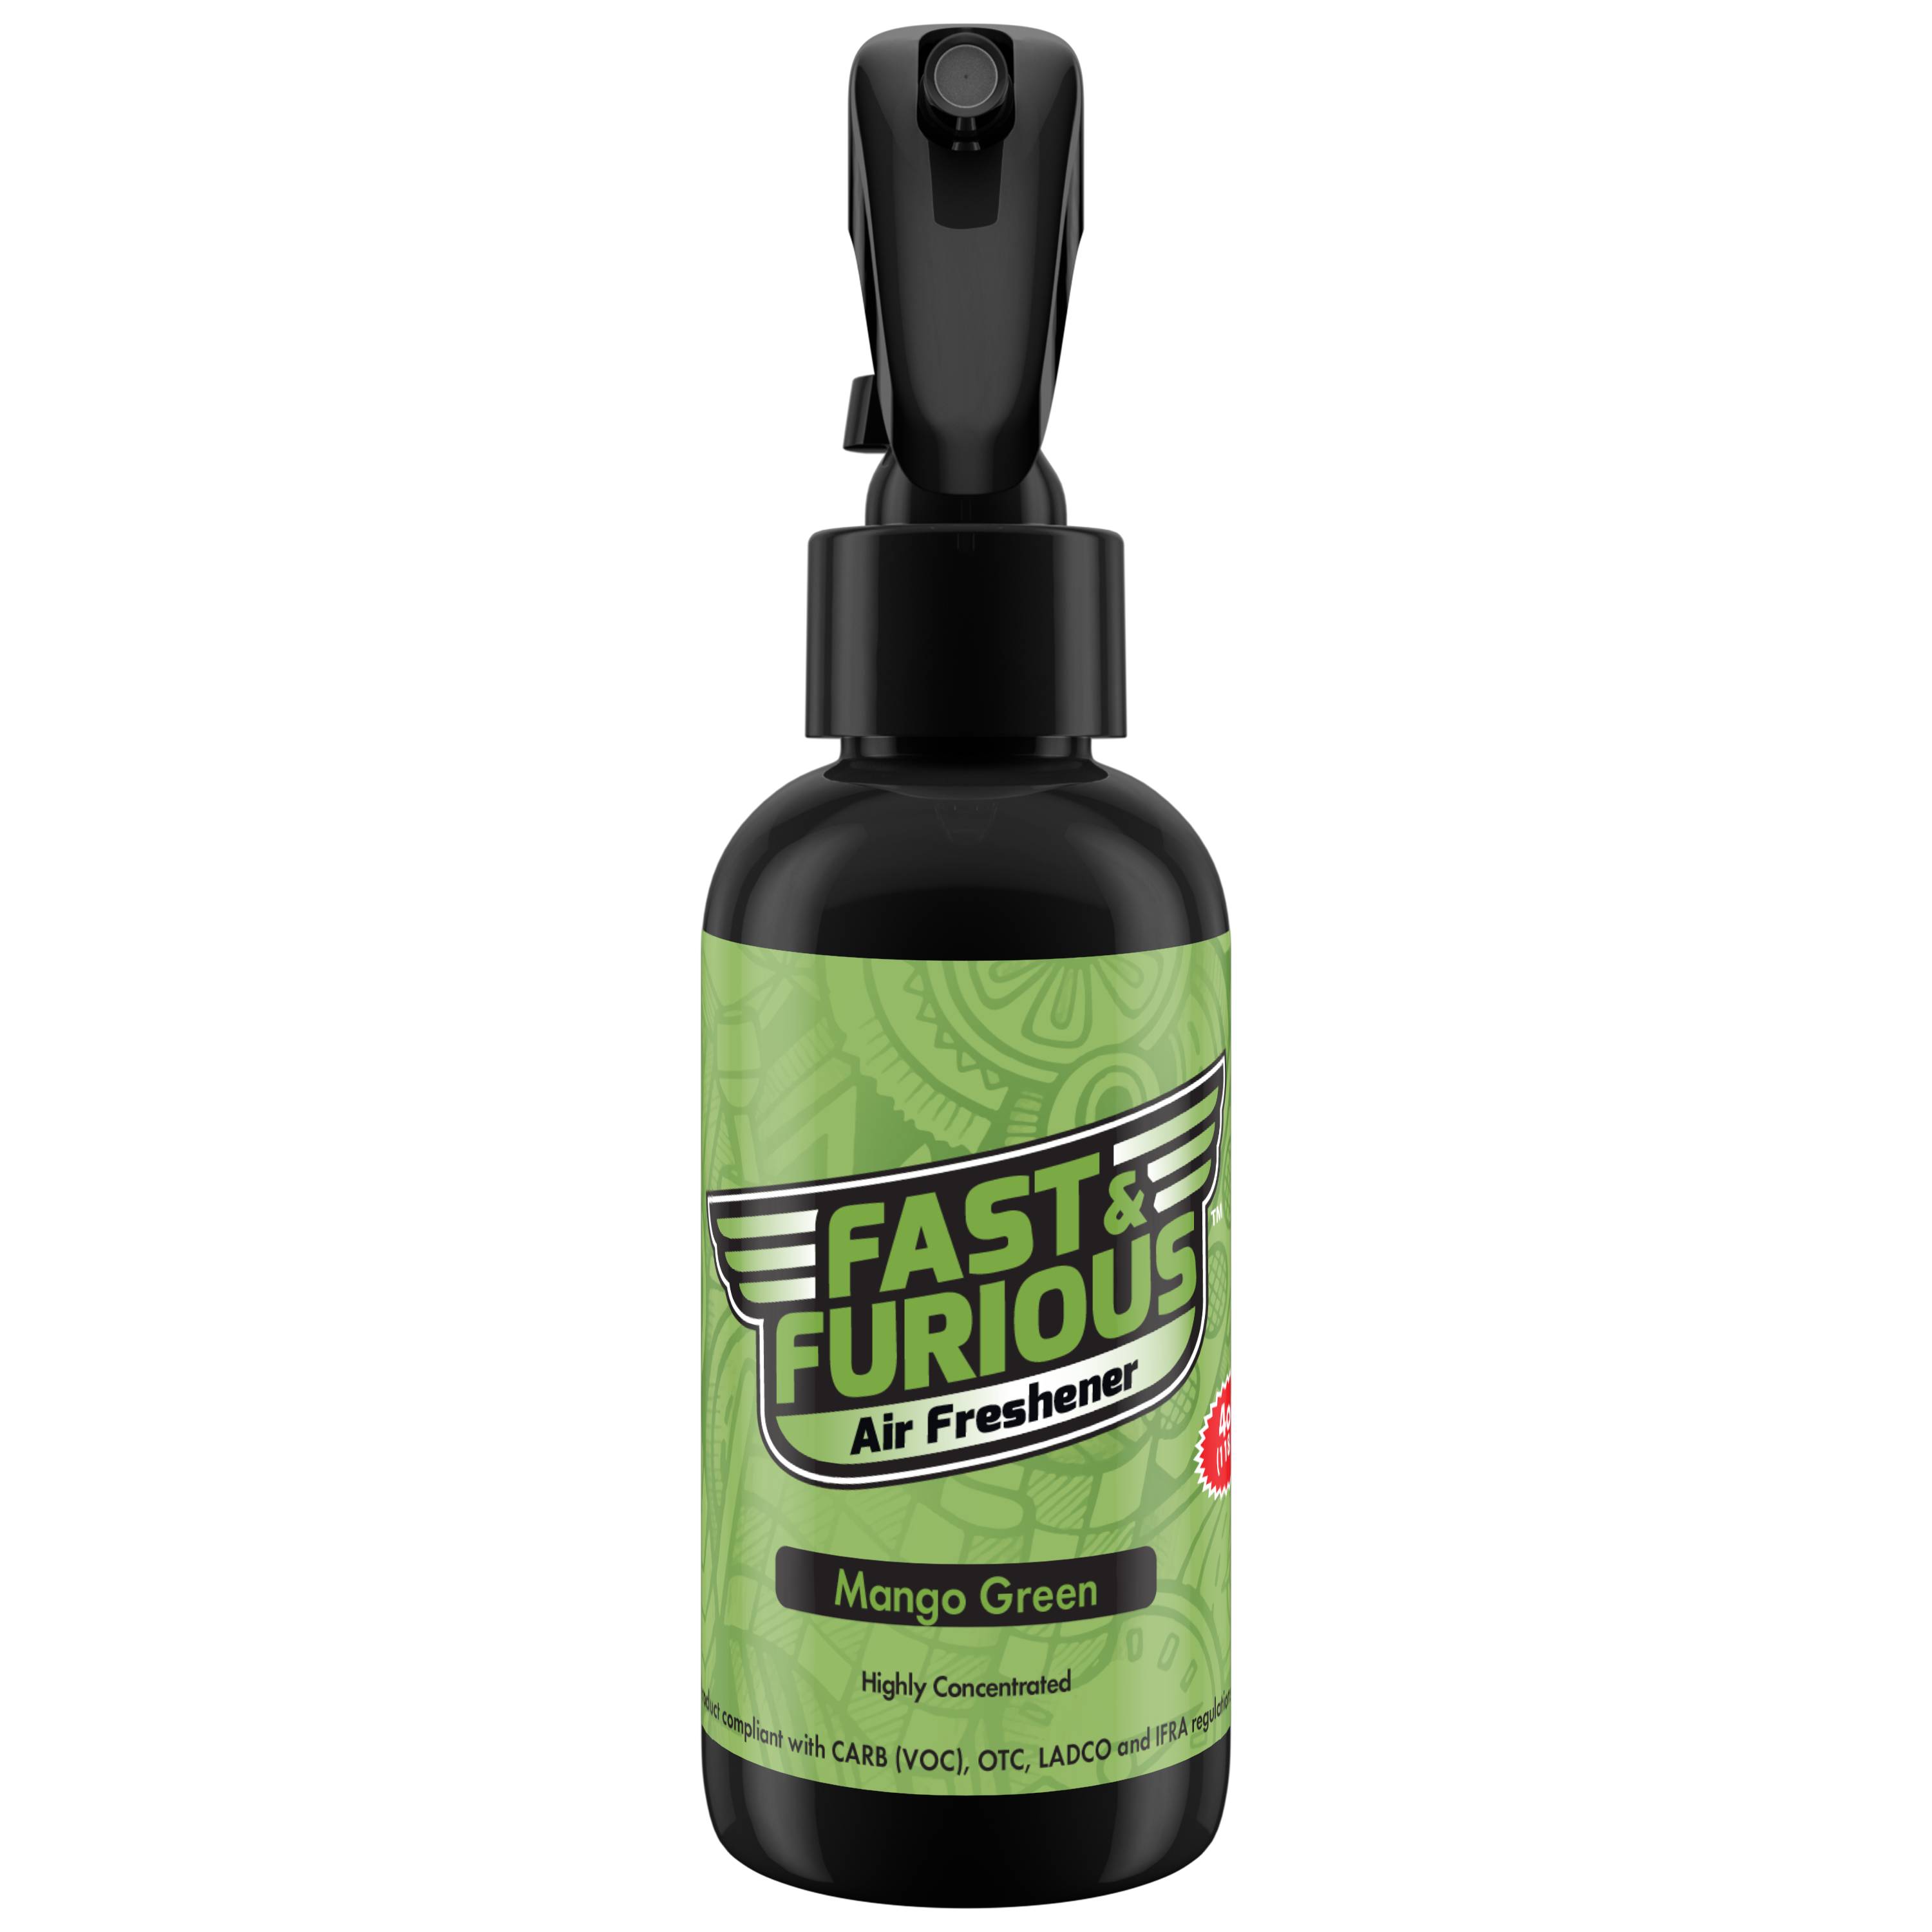 Fast and Furious Air Freshener - Mango Green Scent